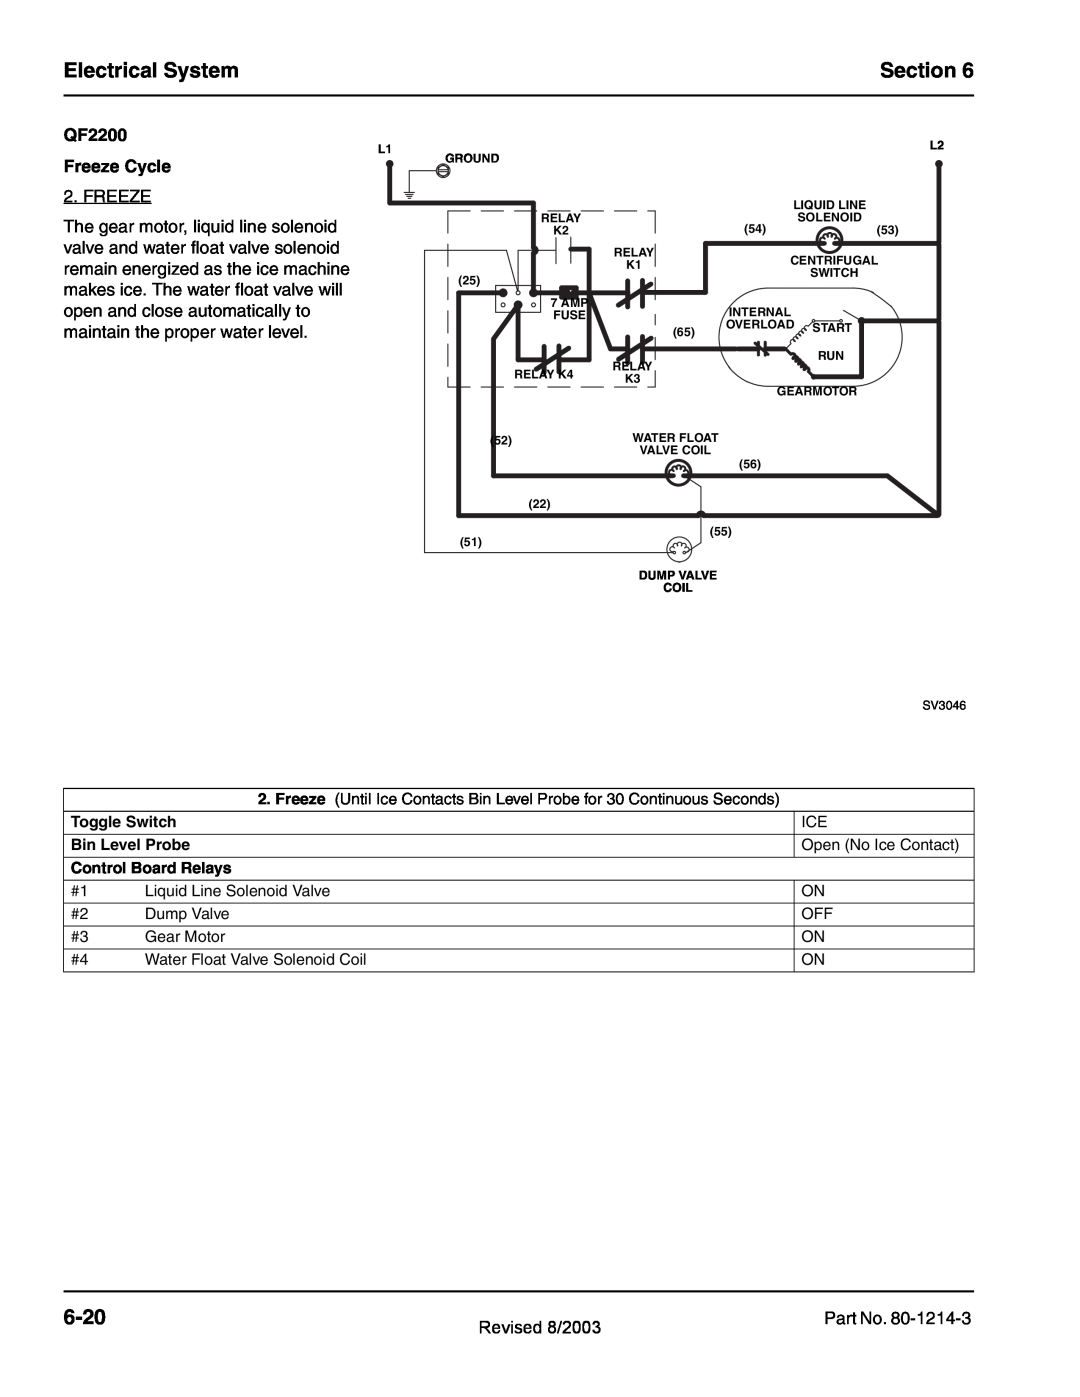 Manitowoc Ice QC0700, QF2300, QF0800, QF0400 service manual Electrical System, Section, 6-20, QF2200, Freeze Cycle 